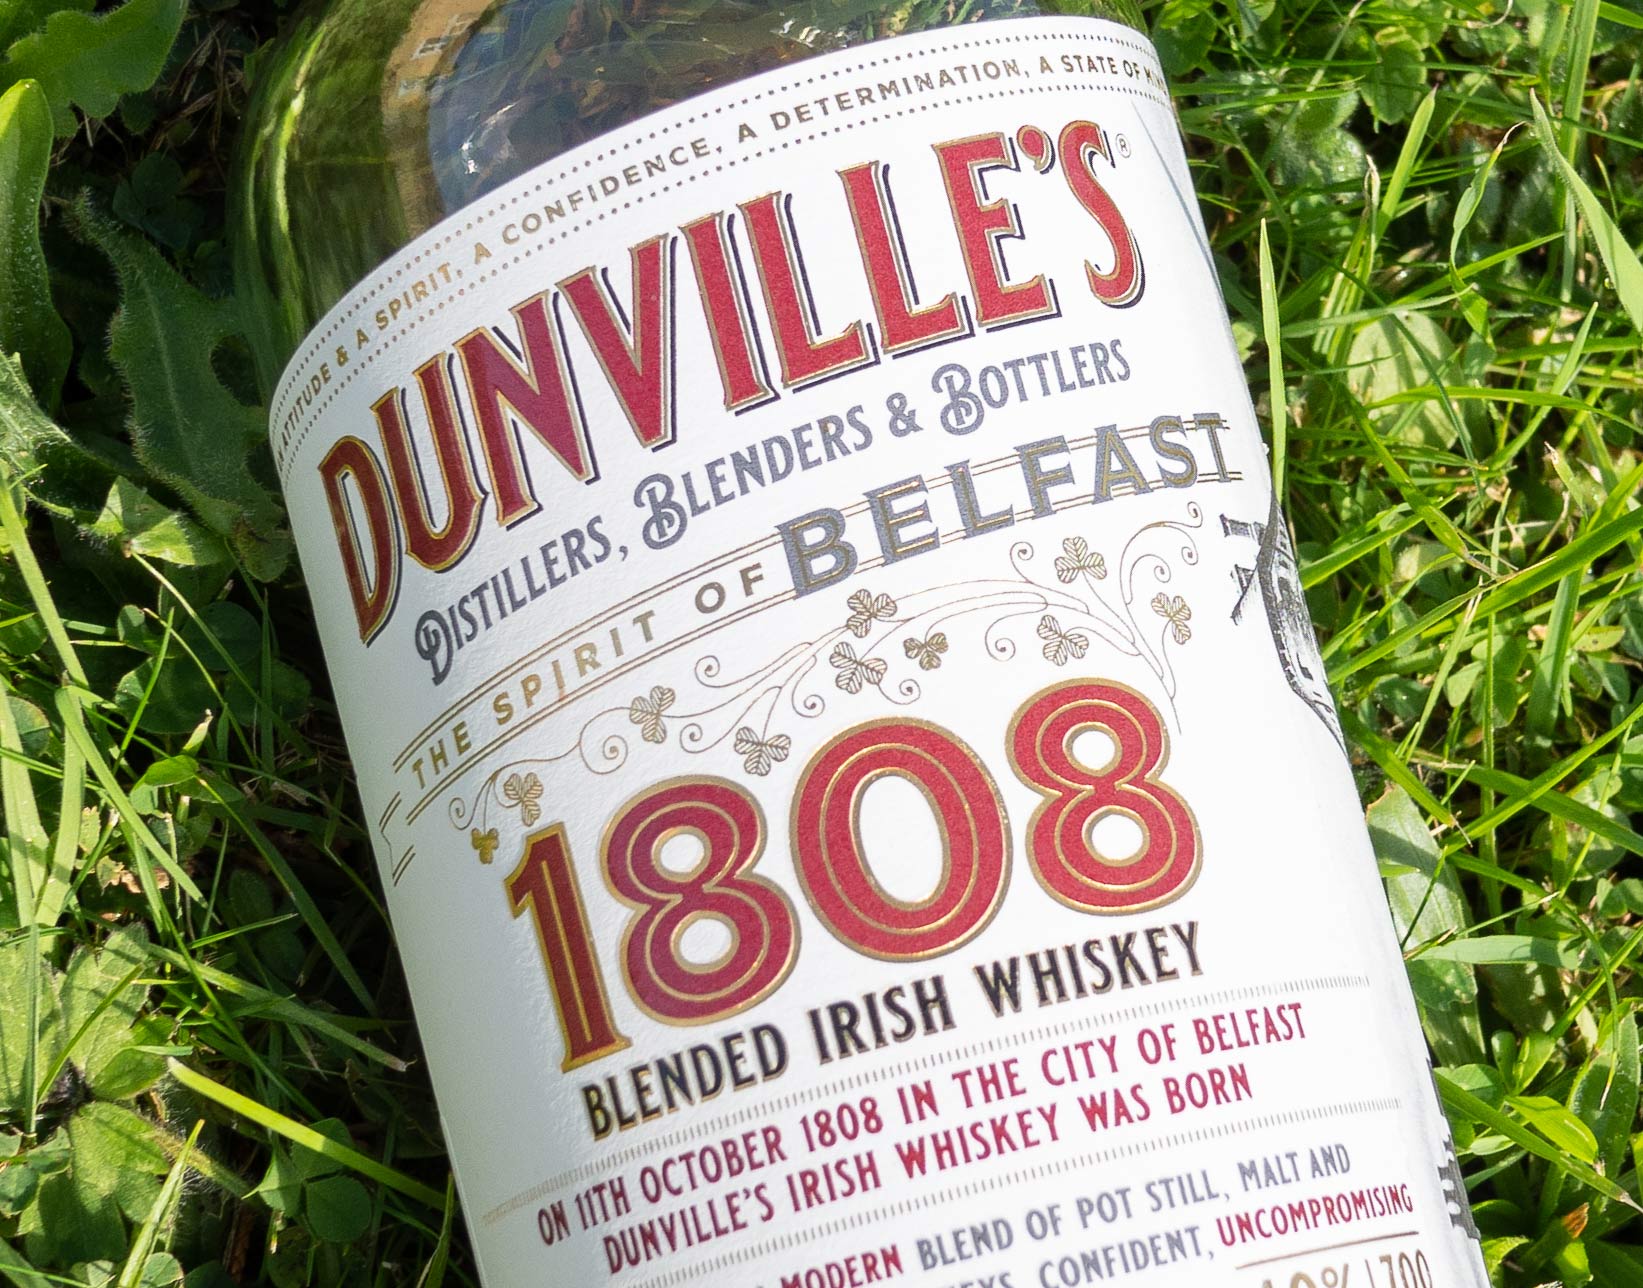 Dunville's 1808